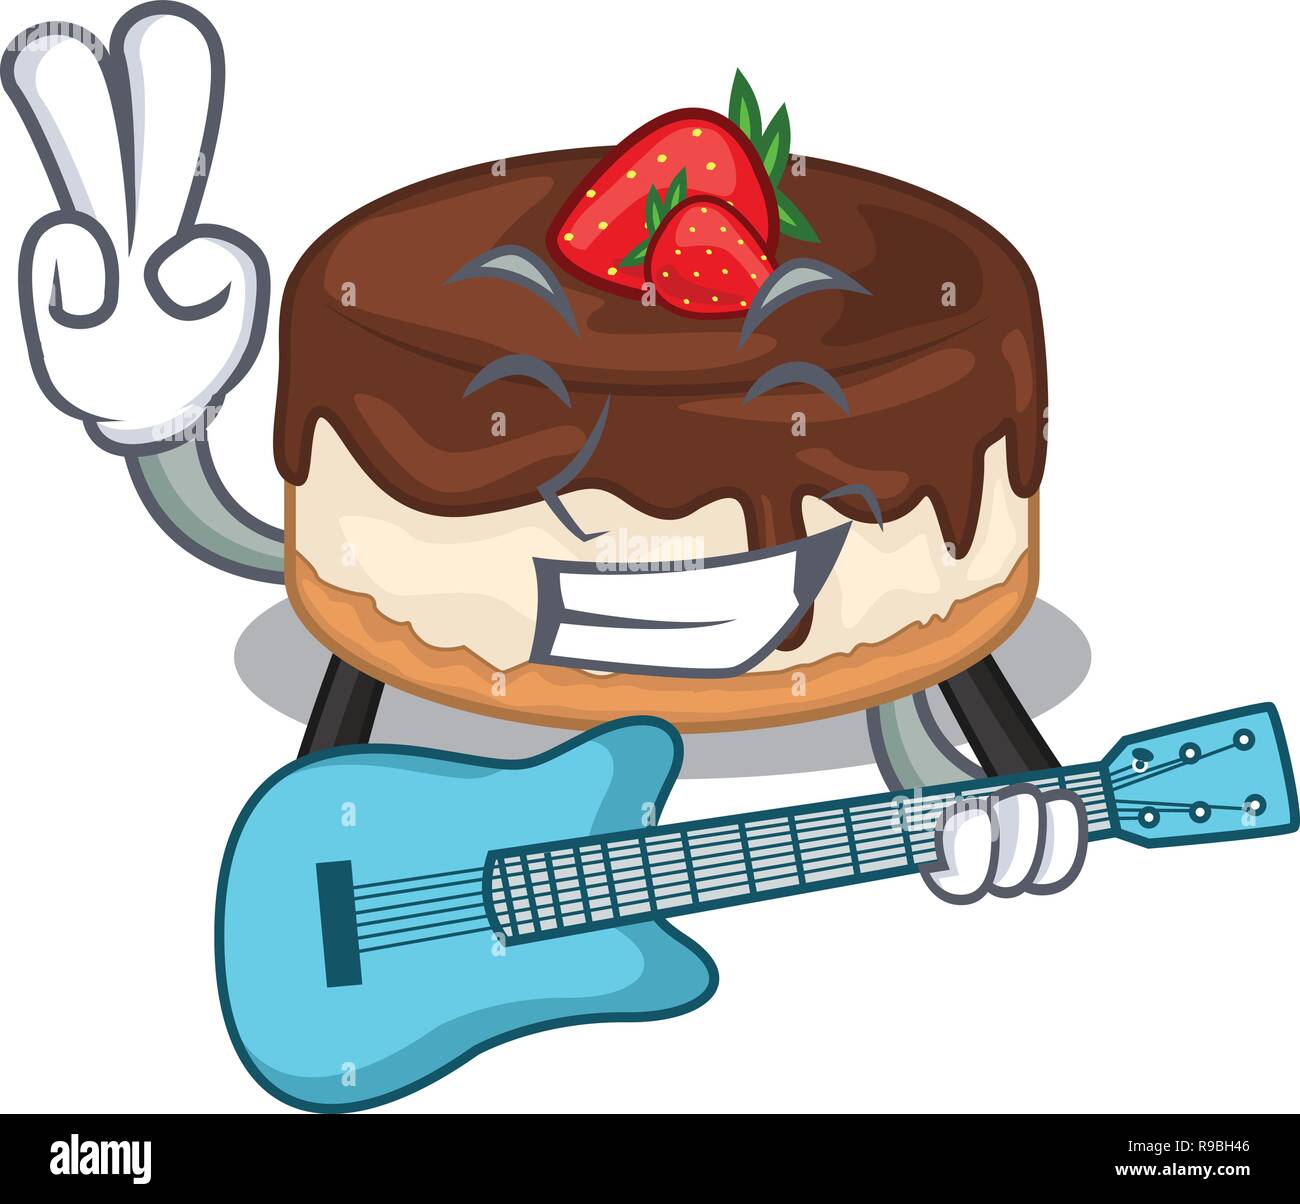 With guitar berries cartoon cake on above table Stock Vector